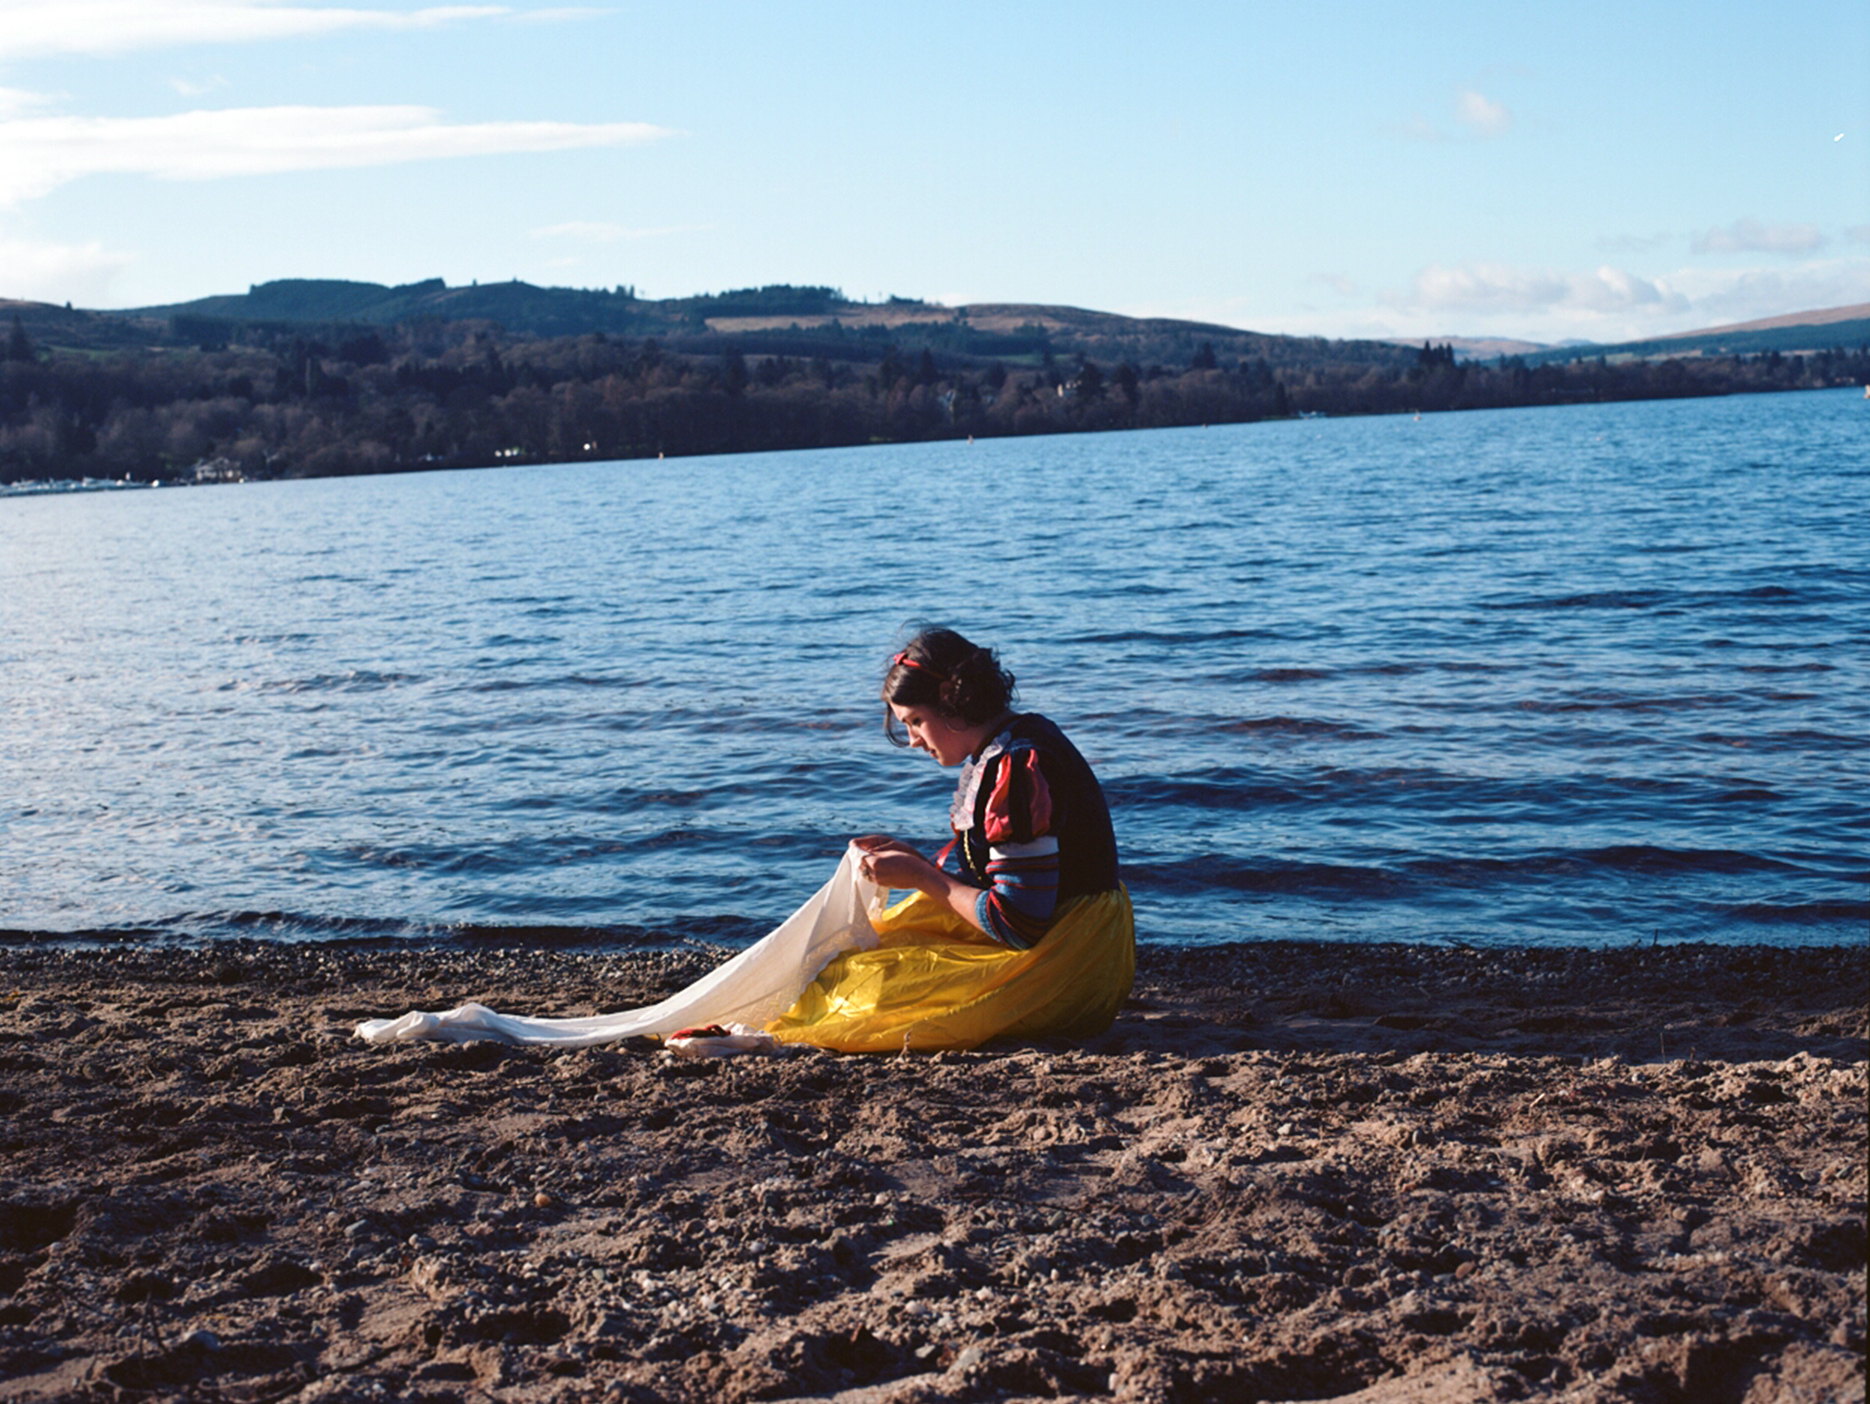 A photo of the Artist dressed as Snow White, sitting and sewing by the edge of Loch Lomond, Scotland.